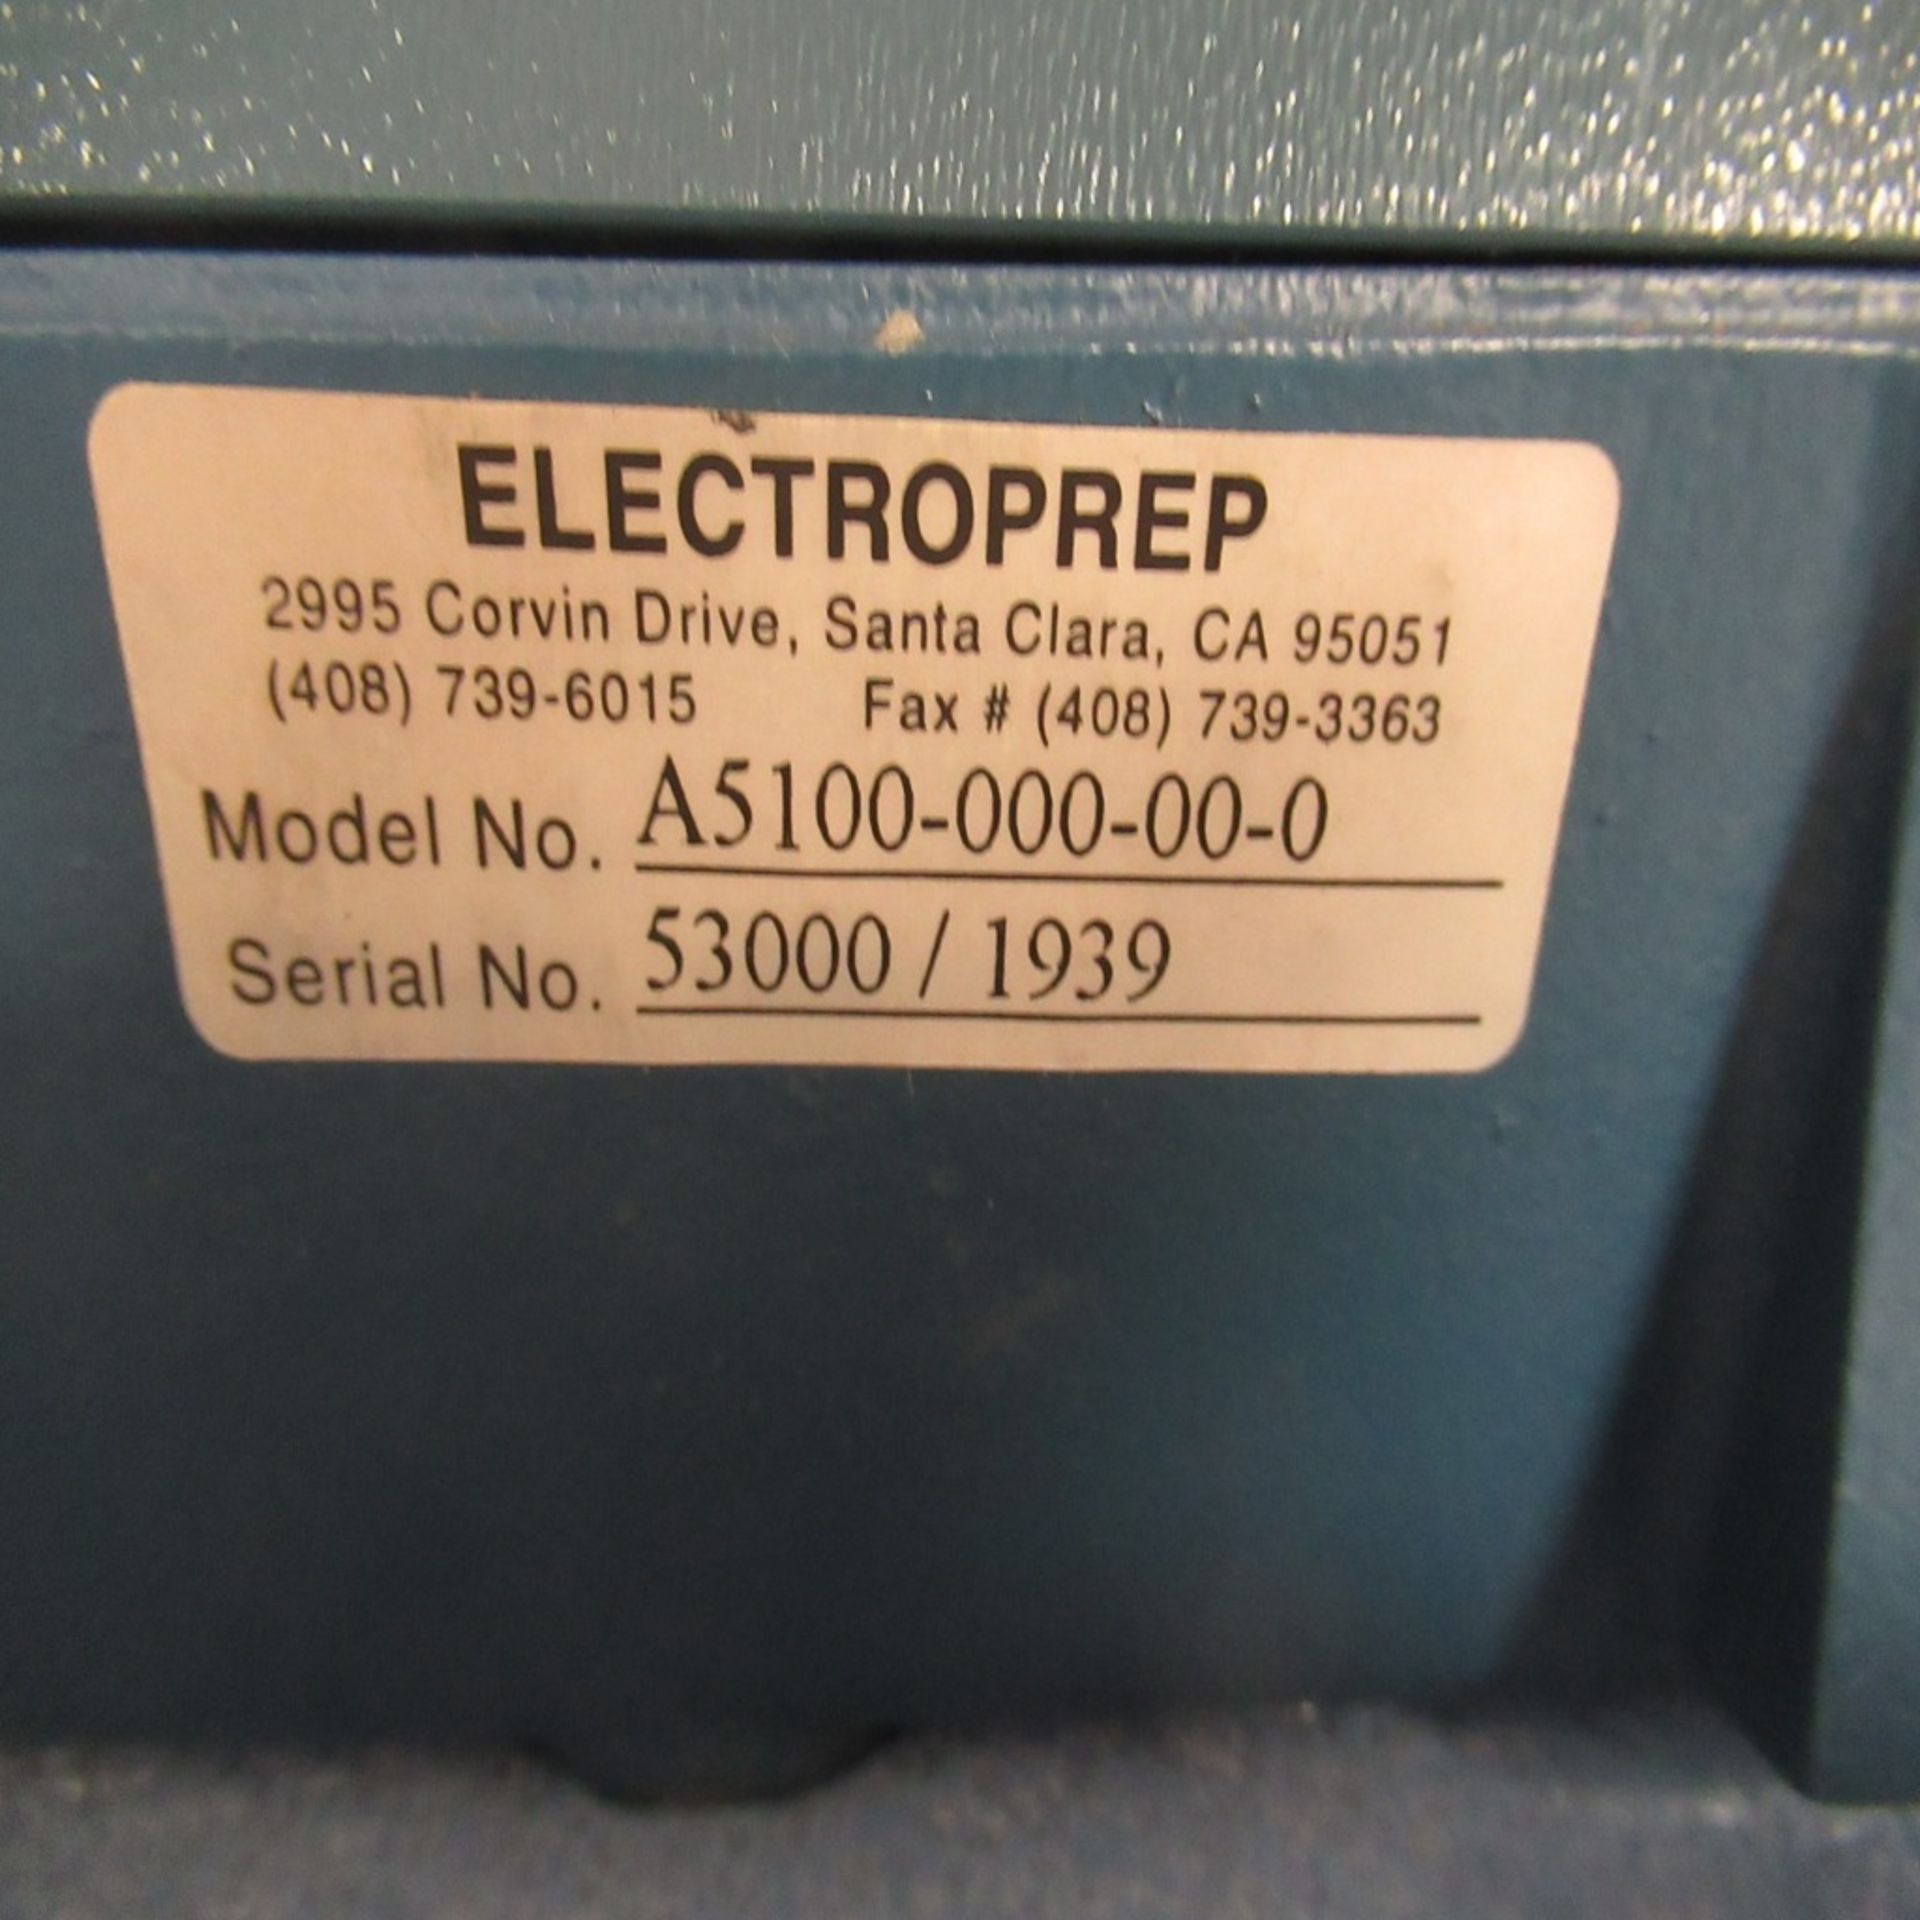 PHOTON SNAP SHOT MODEL 6000 *POWERS ON* NO SCREEN DISPLAY; FARNELL AP20-80 REGULATED POWER SUPPLY * - Image 123 of 222